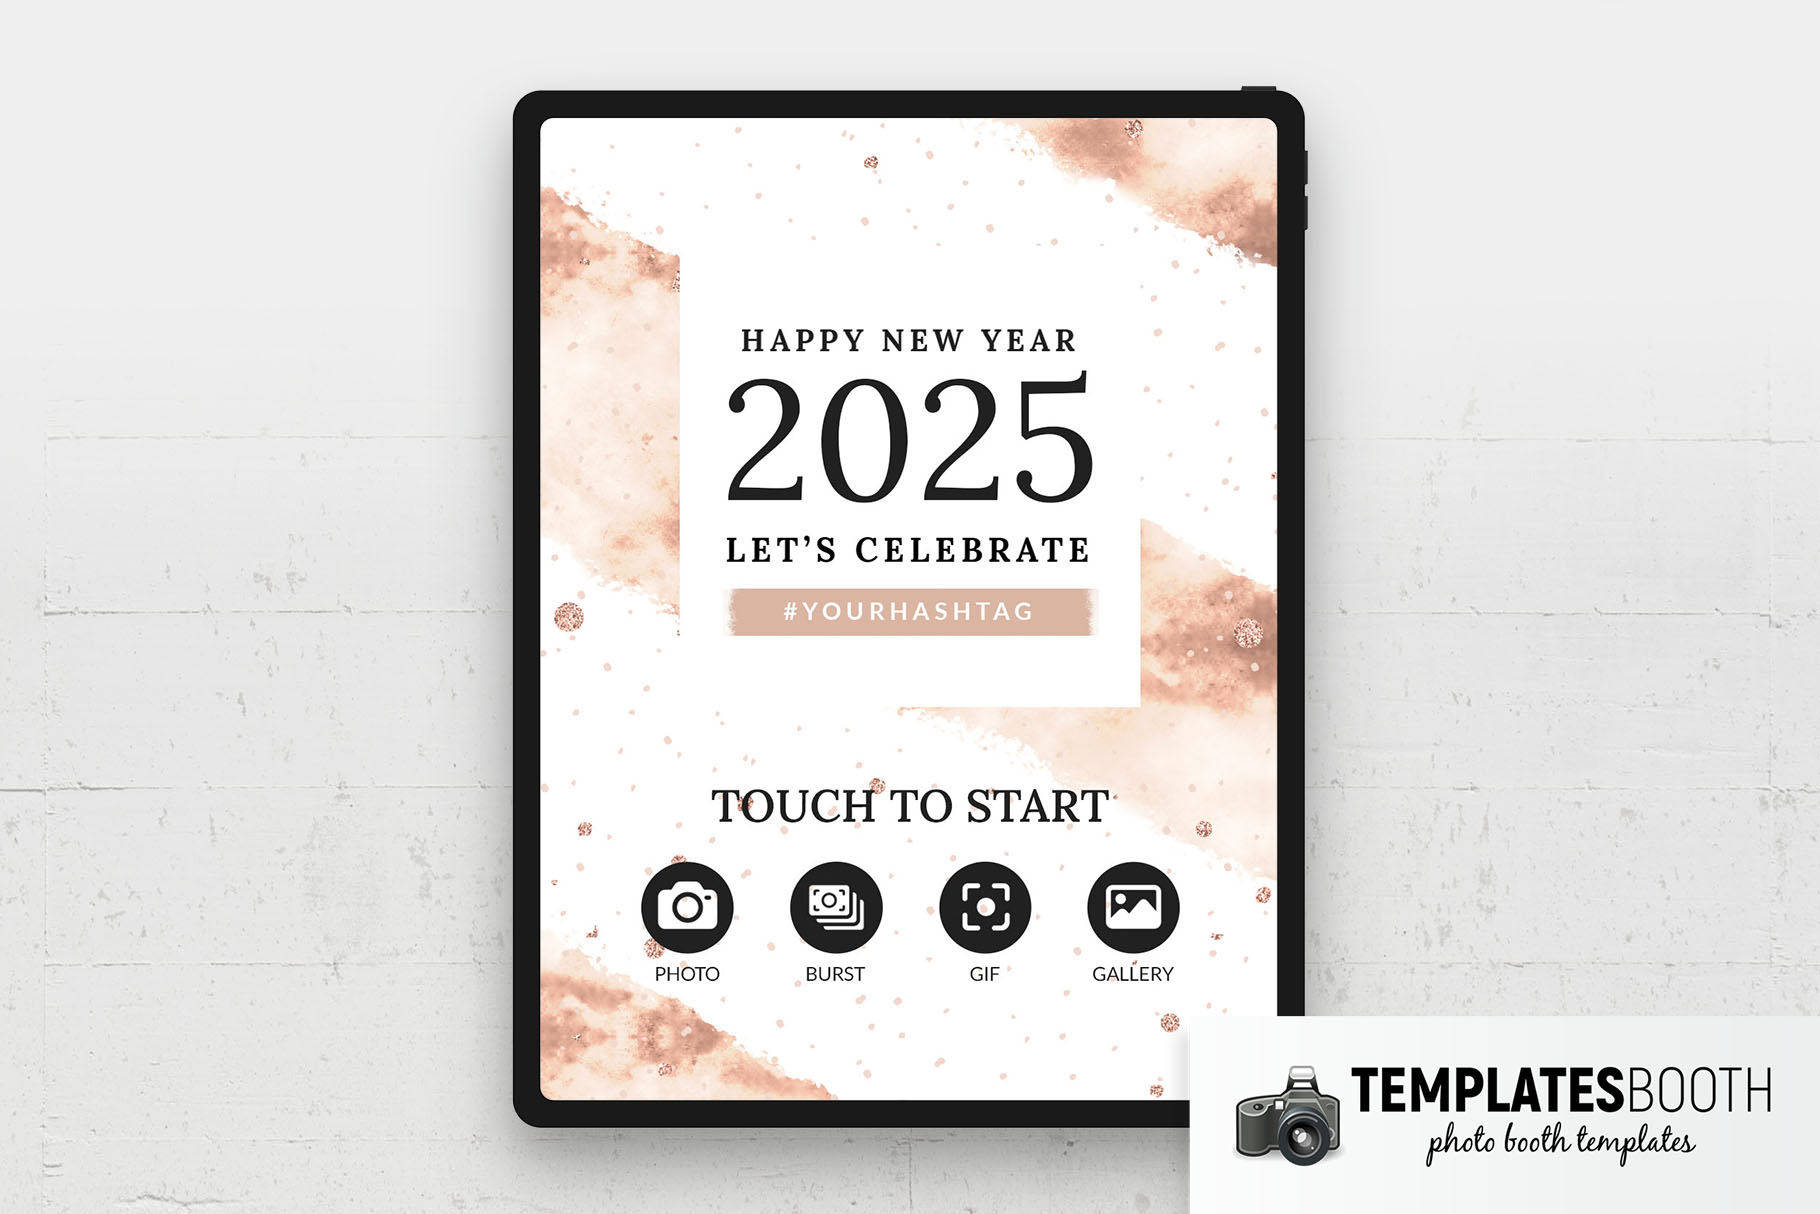 Free Elegant New Year Photo Booth Welcome Screen